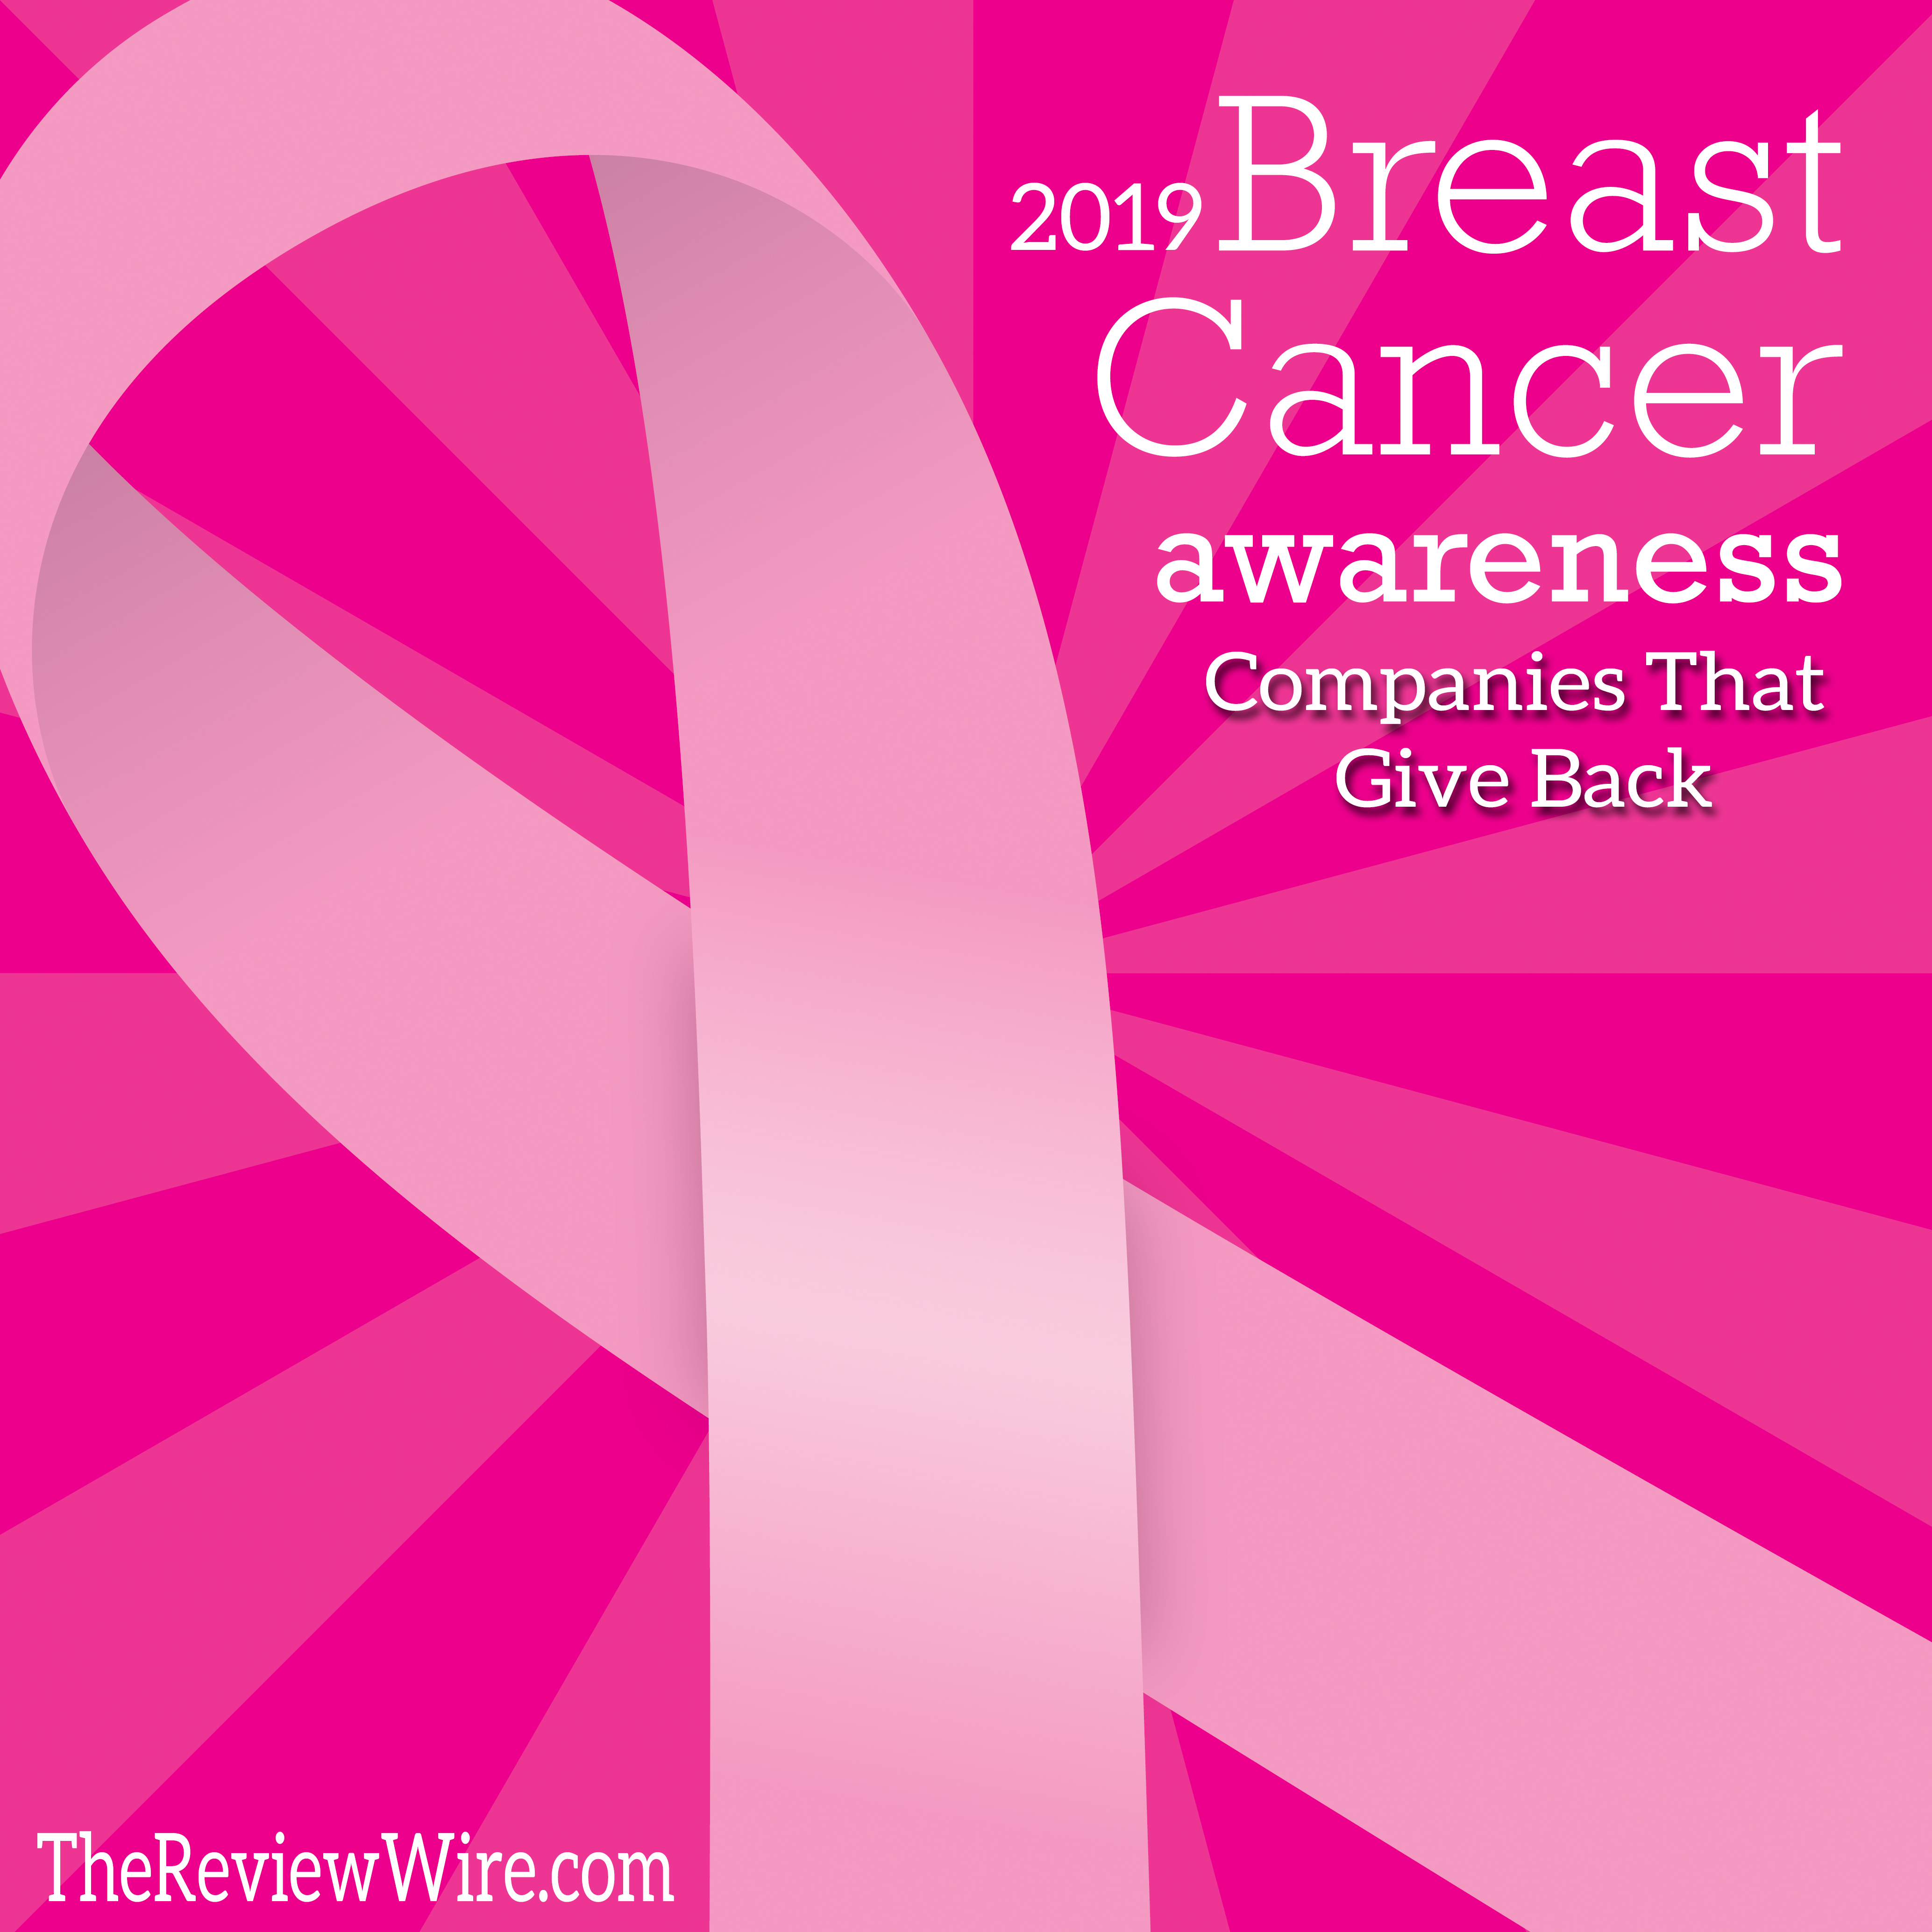 The Review Wire: 2019 Breast Cancer Awareness Guide